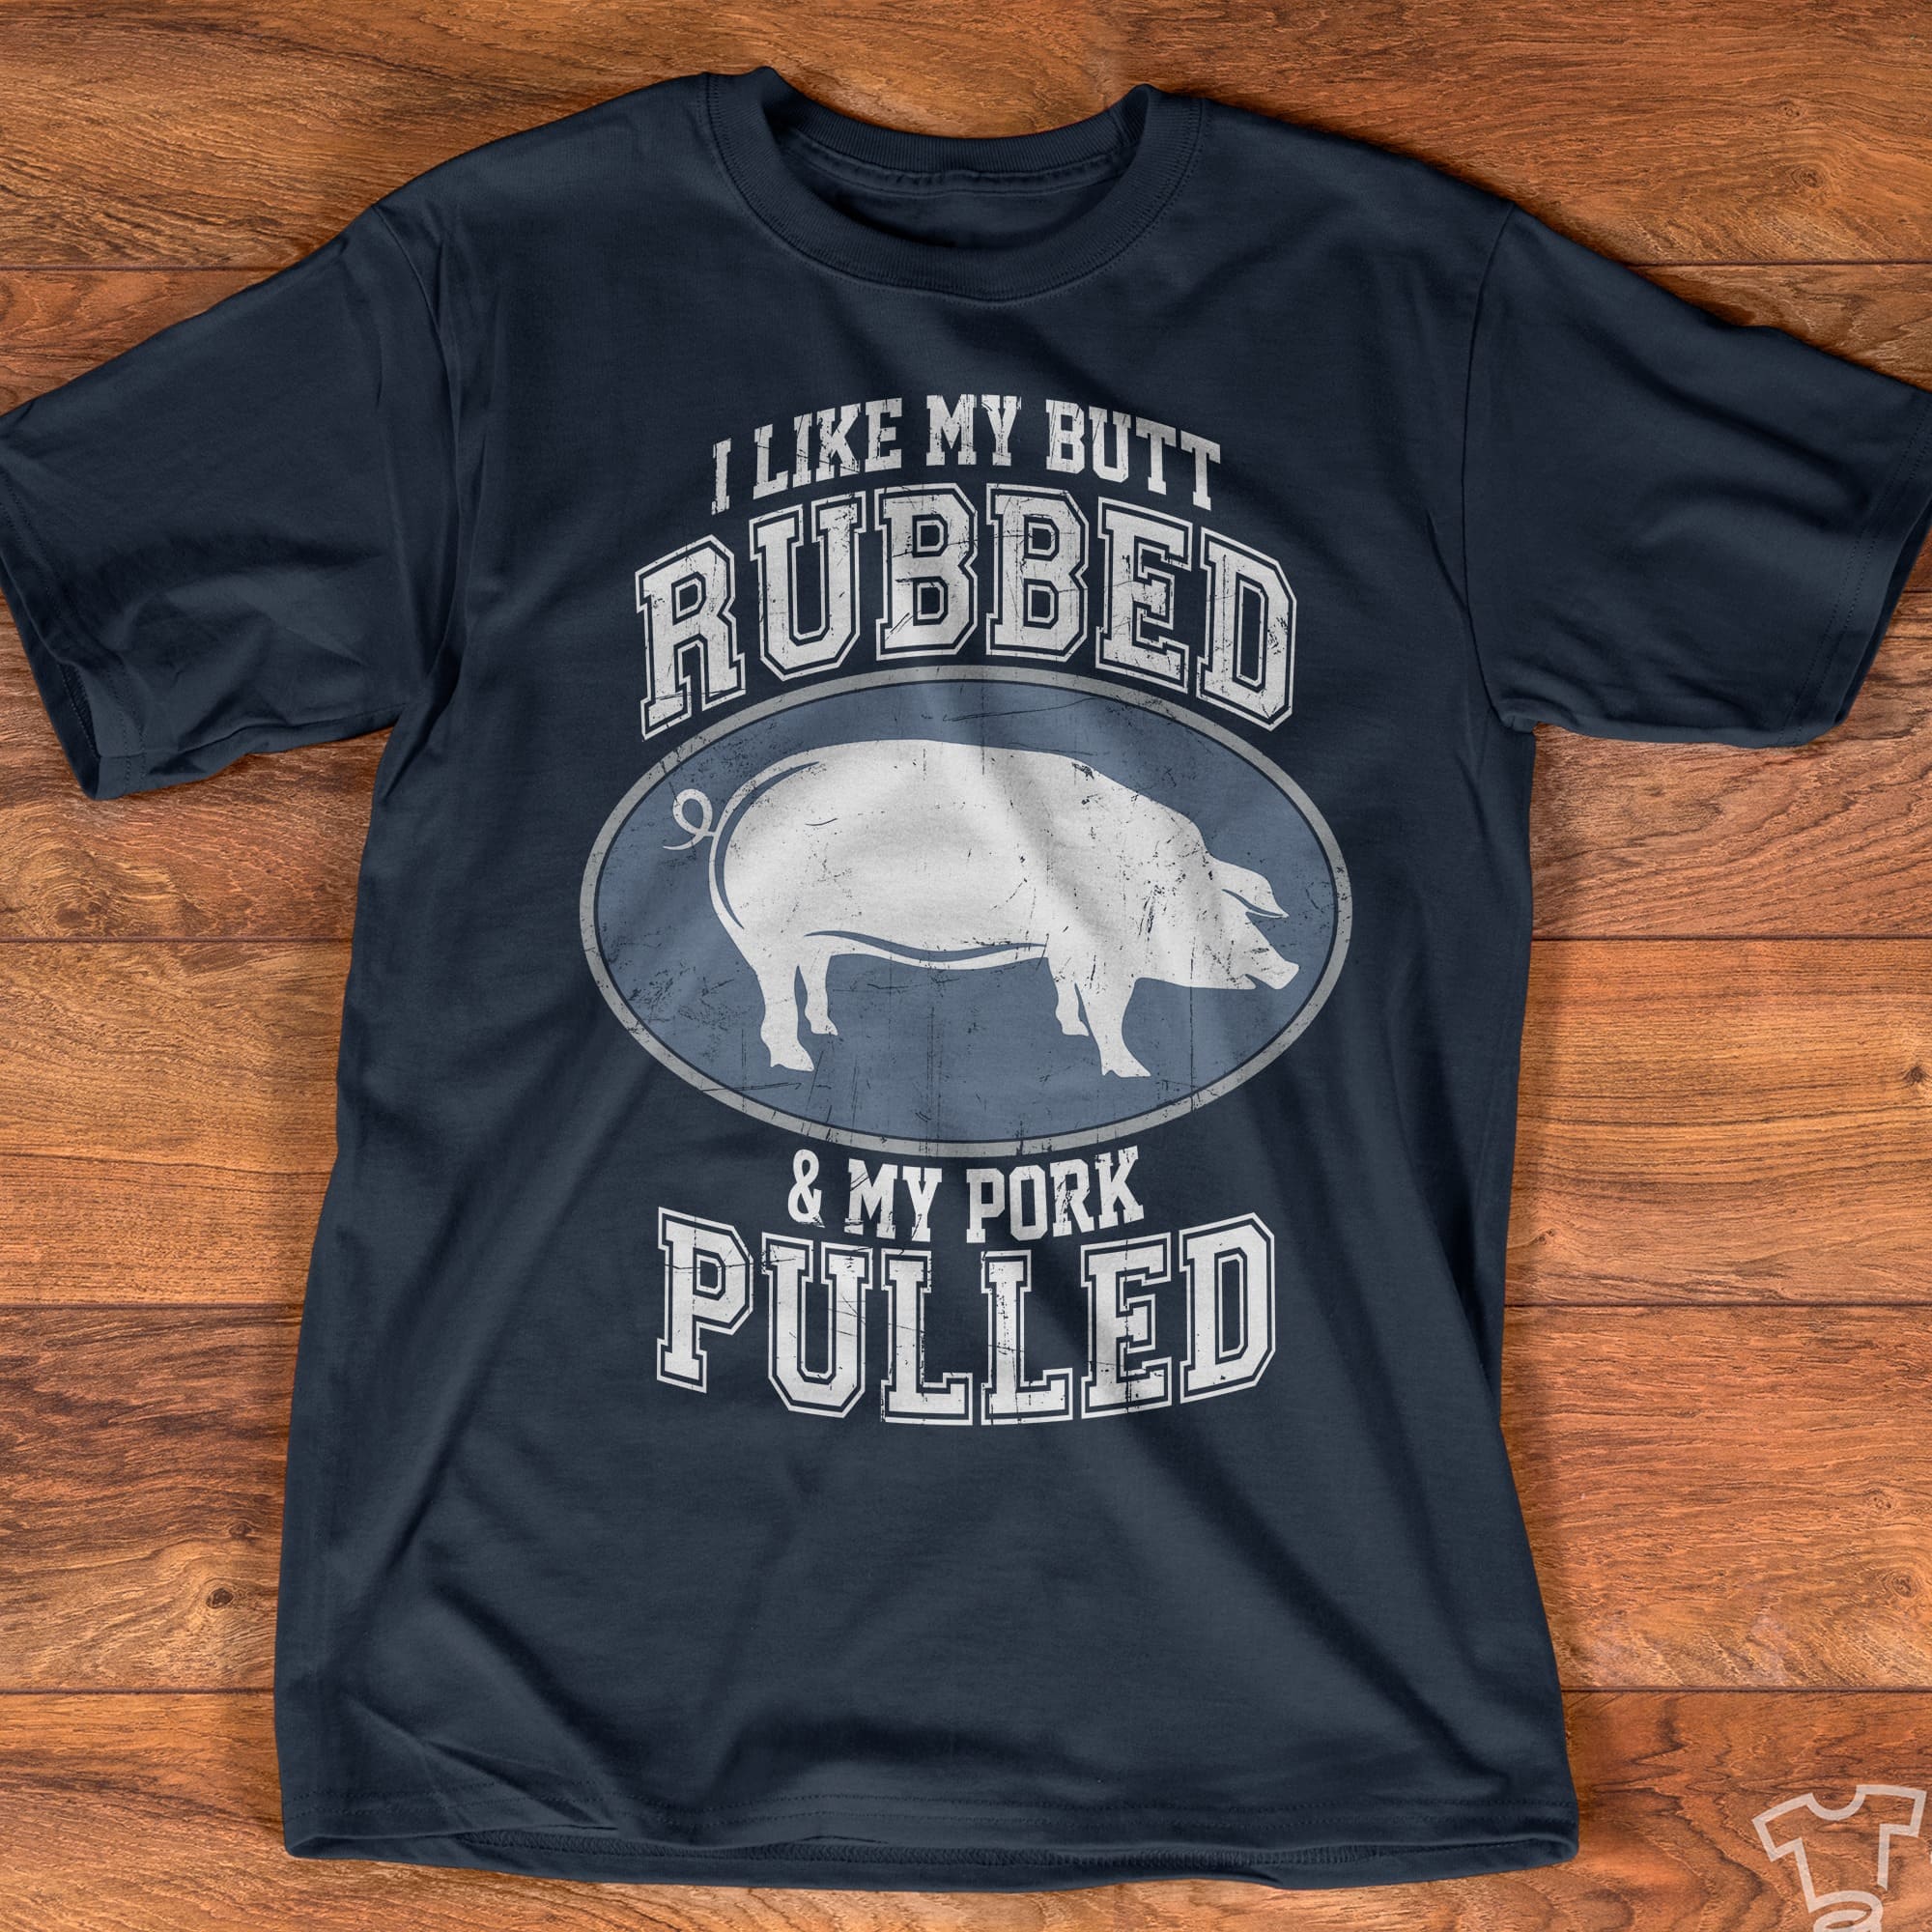 I like my butt rubbed and my pork pulled - Pig animal